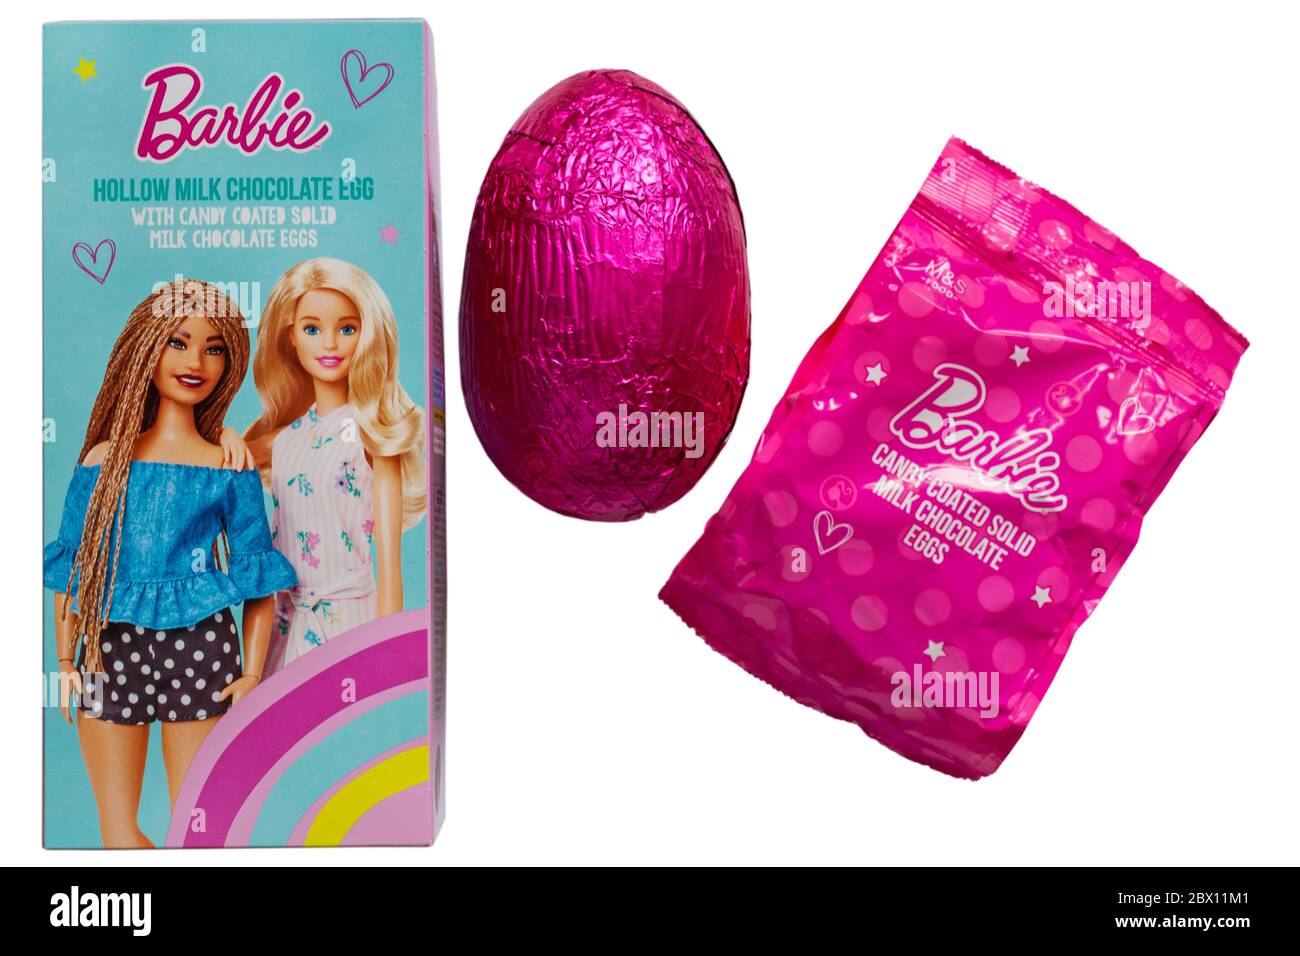 M&S Barbie hollow milk chocolate Easter egg with candy coated solid milk  chocolate eggs isolated on white background - Milk Chocolate Hollow Egg  Stock Photo - Alamy